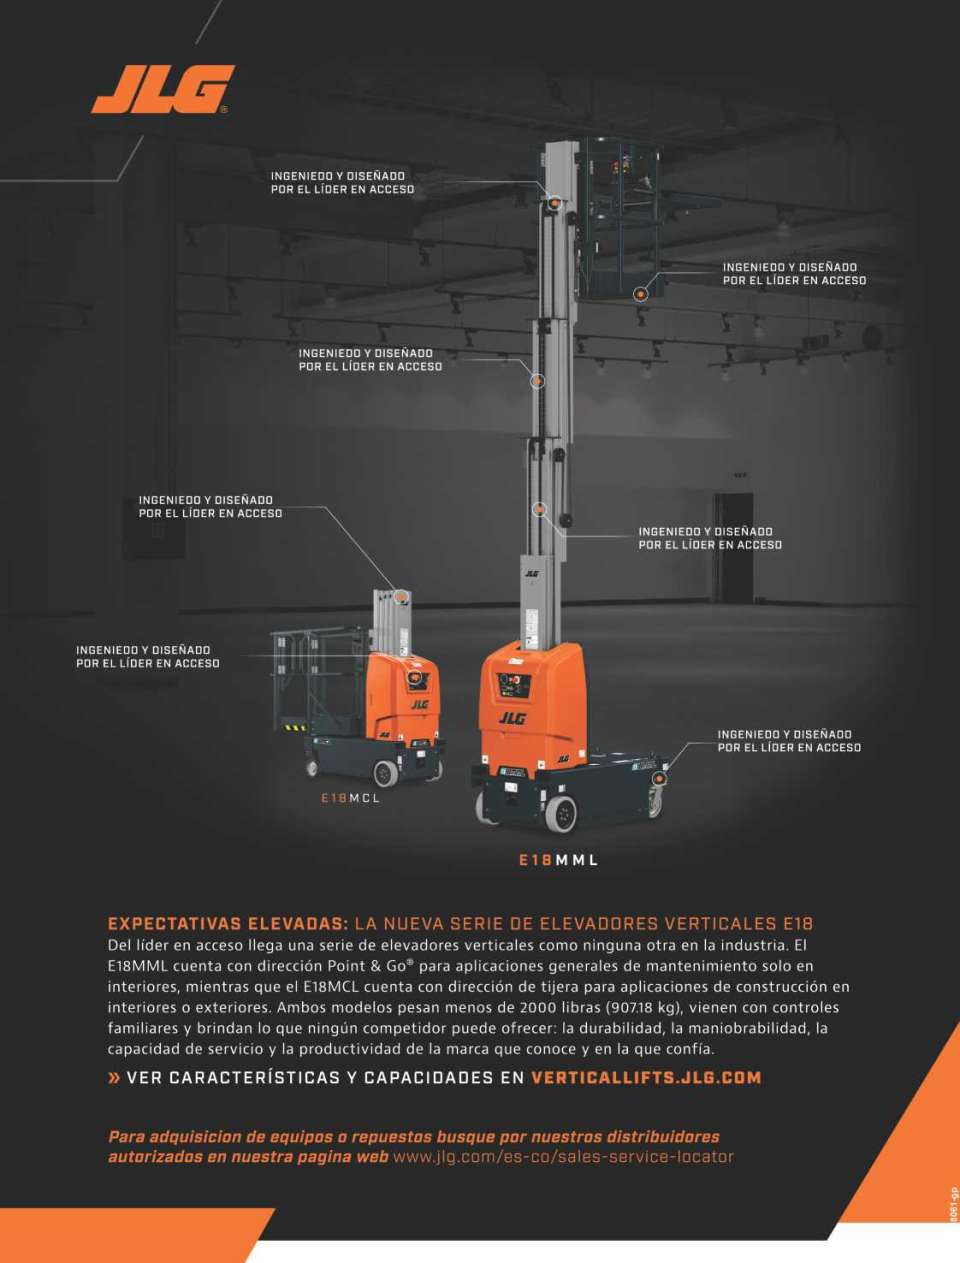 ALL-NEW E18 VERTICAL LIFT SERIES. From the leader in access comes a vertical lift series unlike any other. With models for indoor or outdoor applications, each machine weighs less than 2,000-lbs.